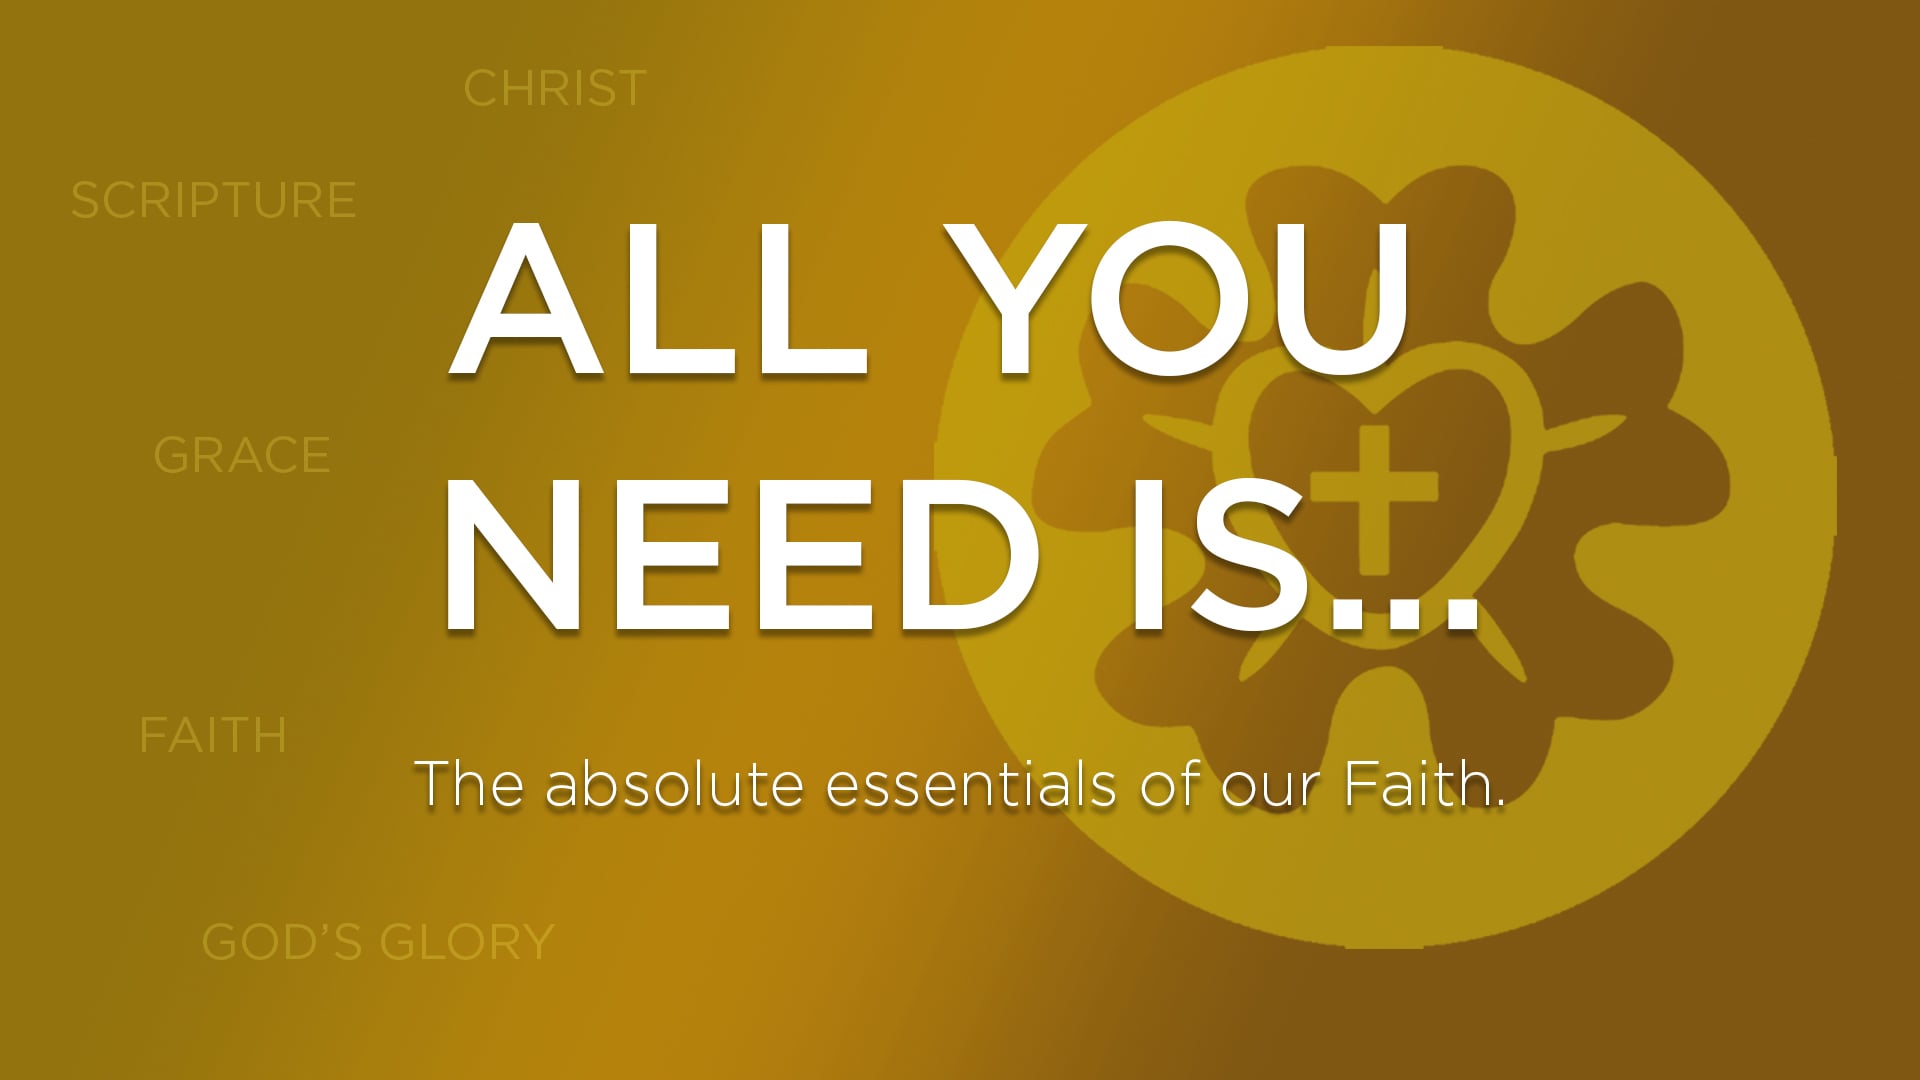 All You Need Is - Scripture